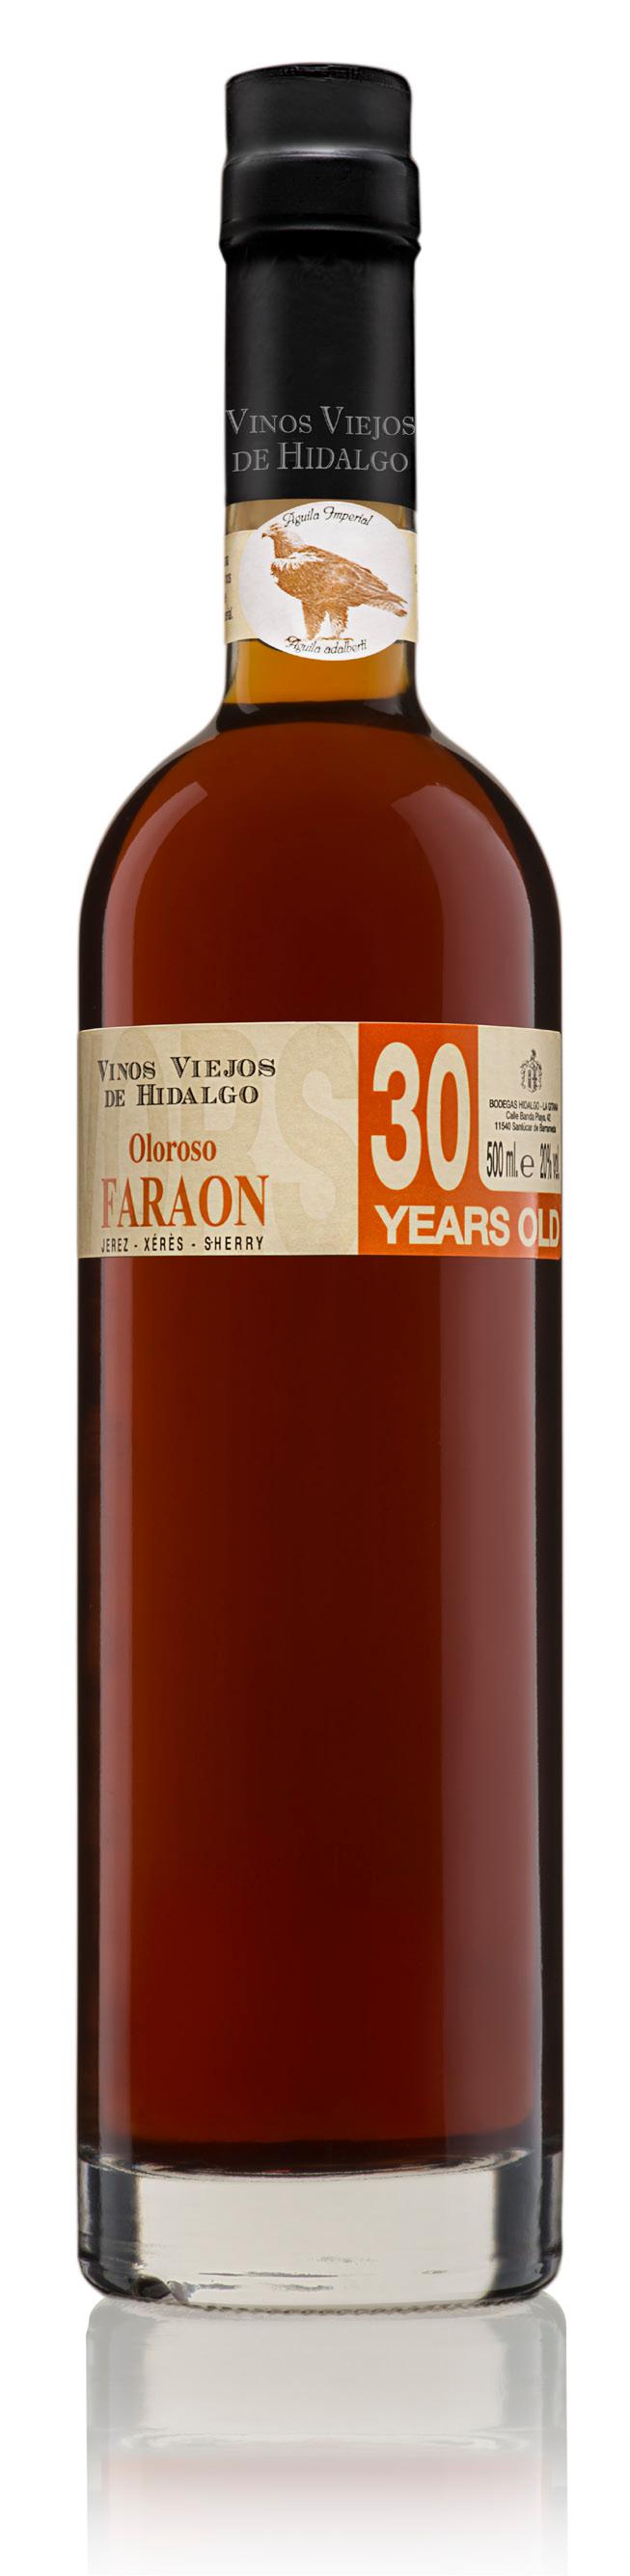 FARAON OLOROSO 30 YEARS VORS D.O. Jerez-Xérès-Sherry 93 WS Bodegas Hidalgo la Gitana was founded in 1792 and since then the company has passed from father to son.